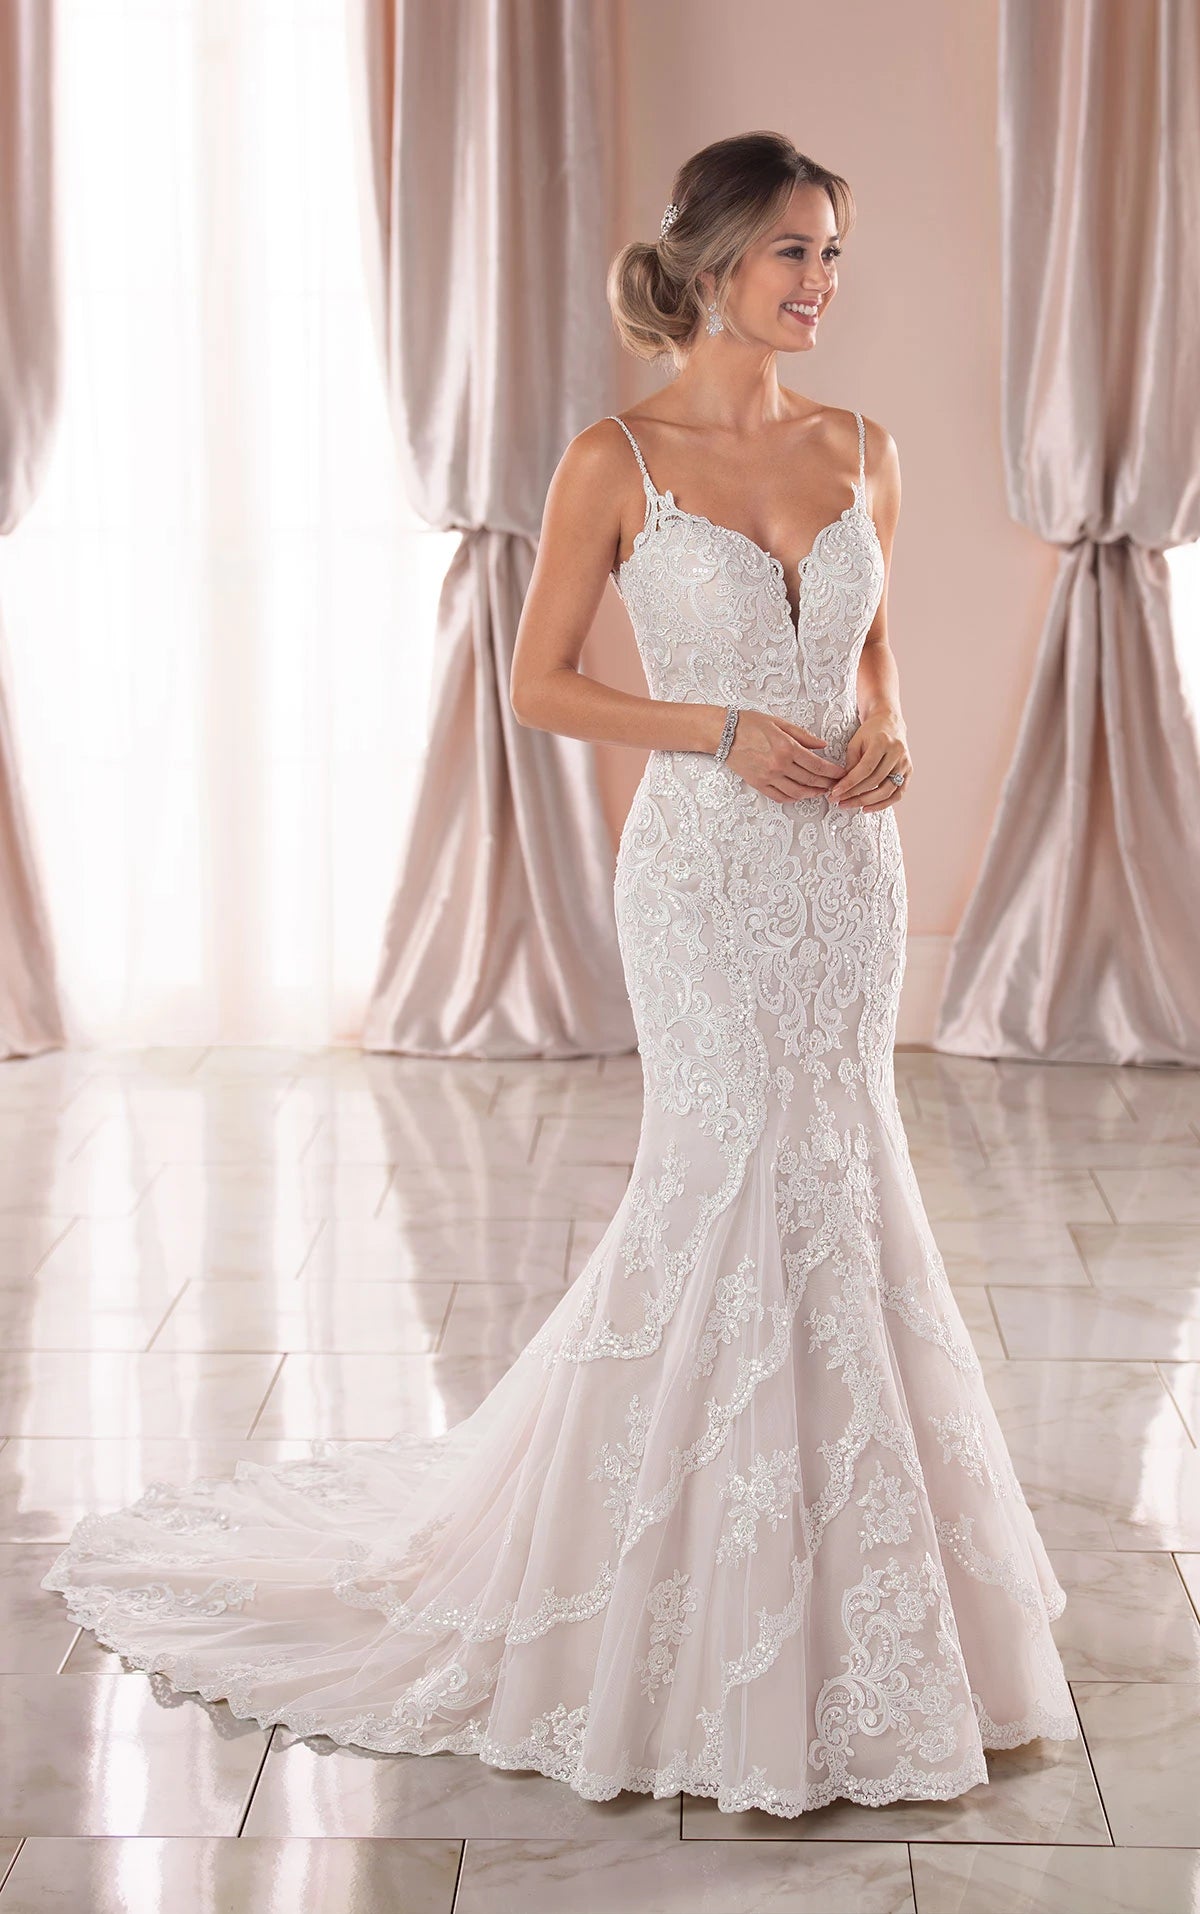 GRAPHIC LACE MERMAID WEDDING DRESS WITH OPEN BACK